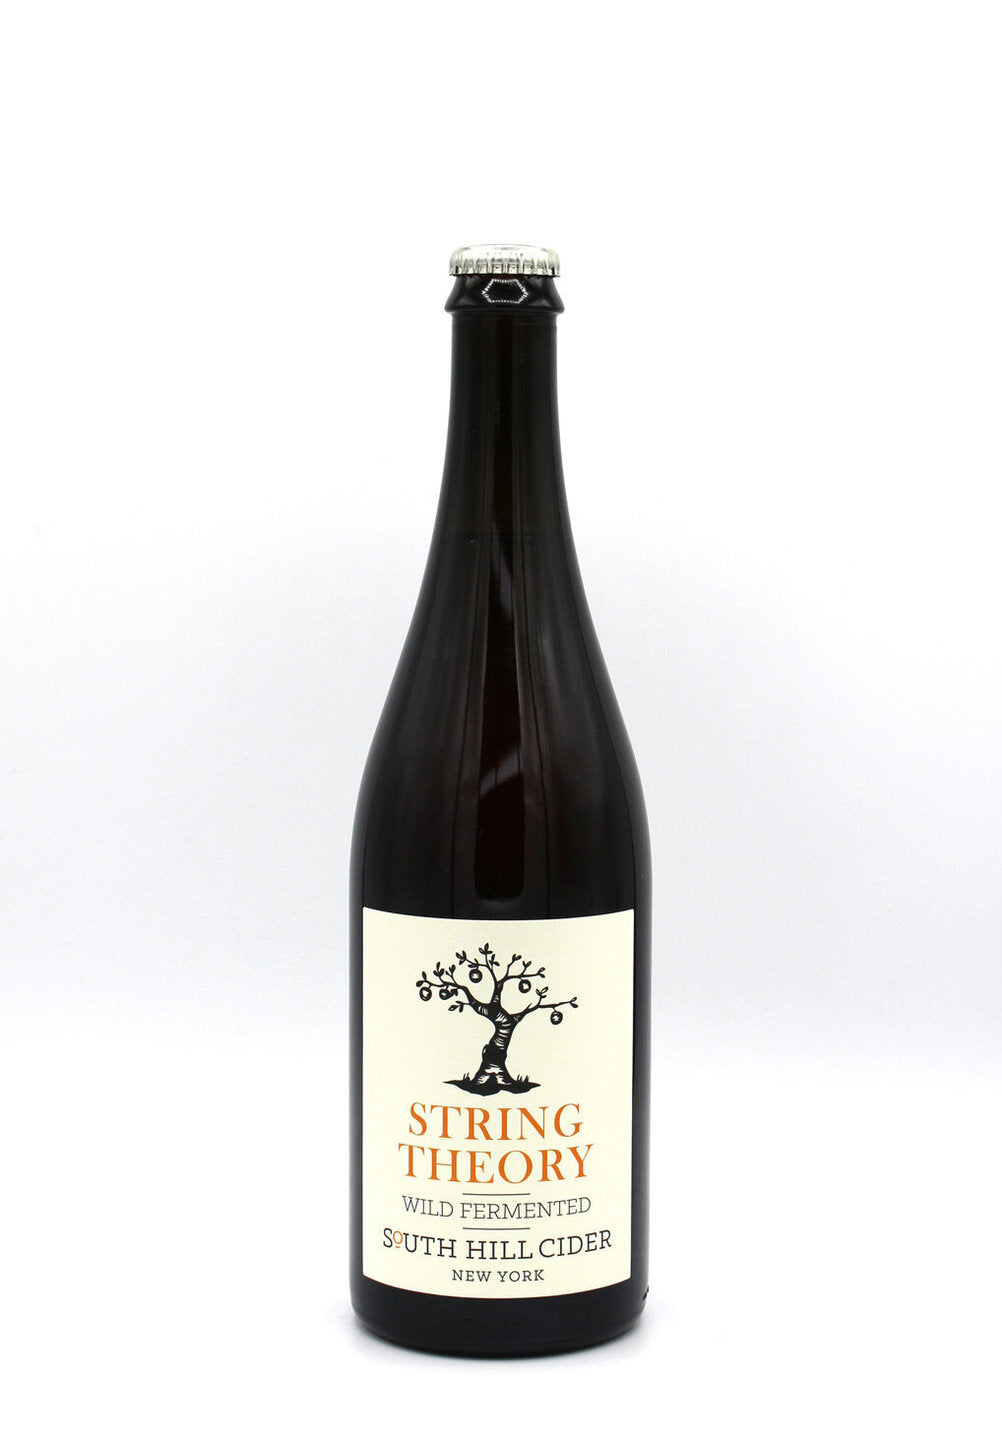 String Theory, South Hill Cider NV